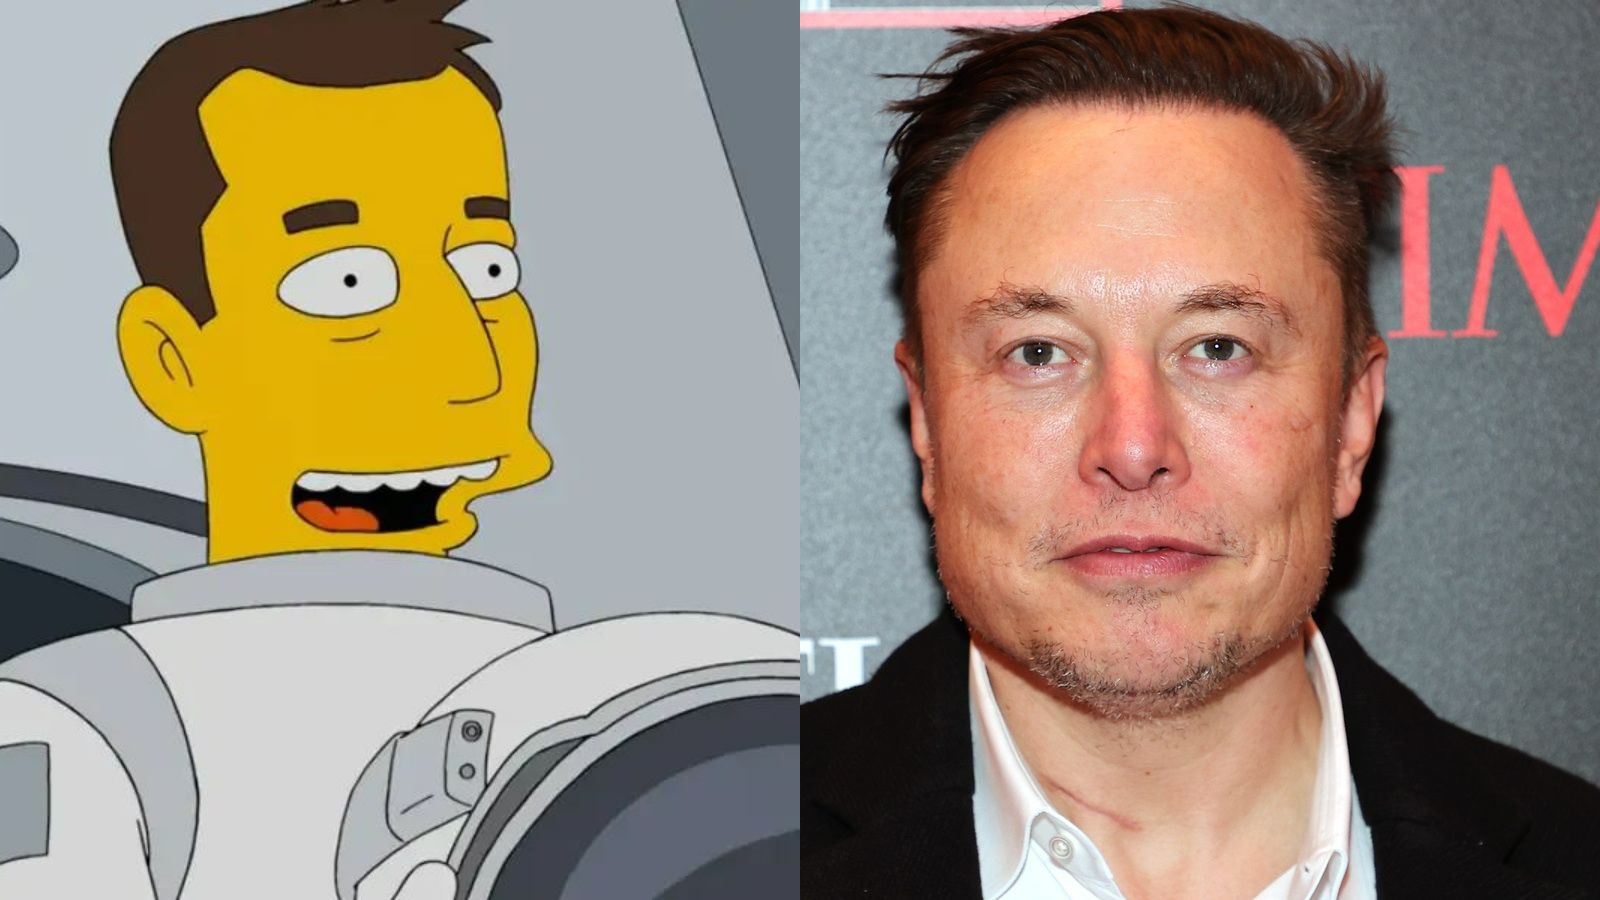 Here’s All of Elon Musk’s Pop Culture Appearances